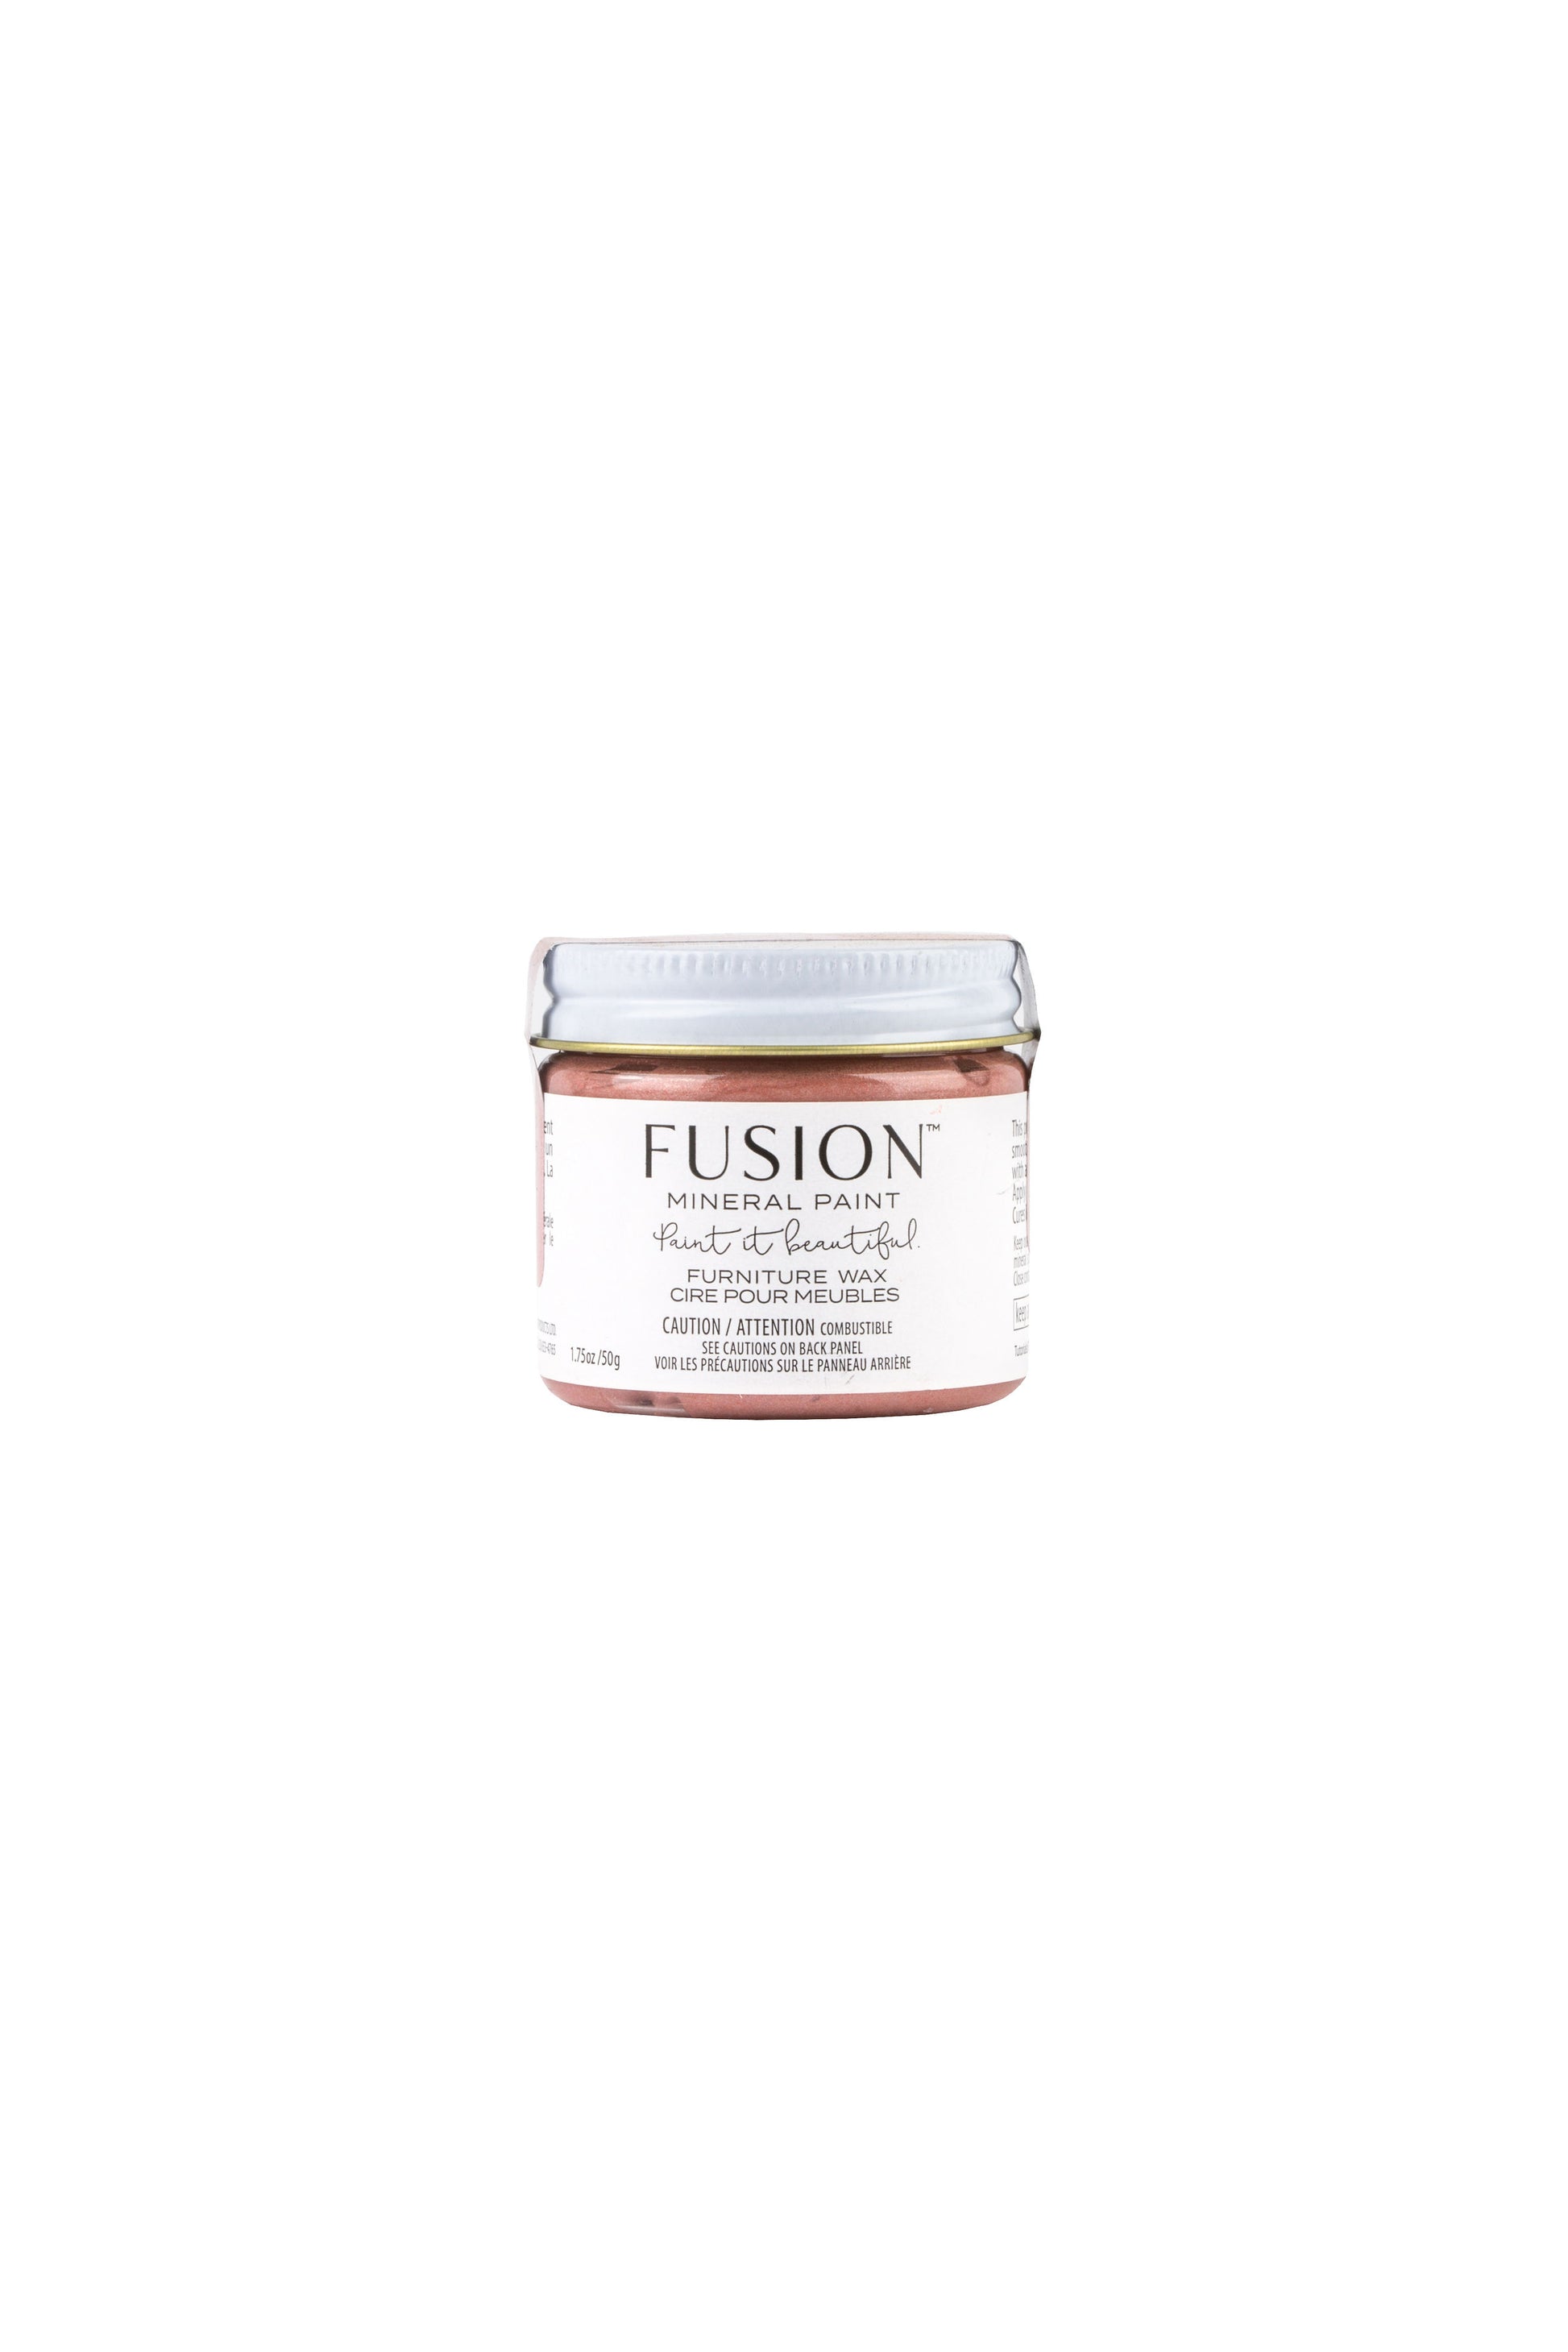 Rose Gold Wax Fusion Mineral Paint | 50g Size